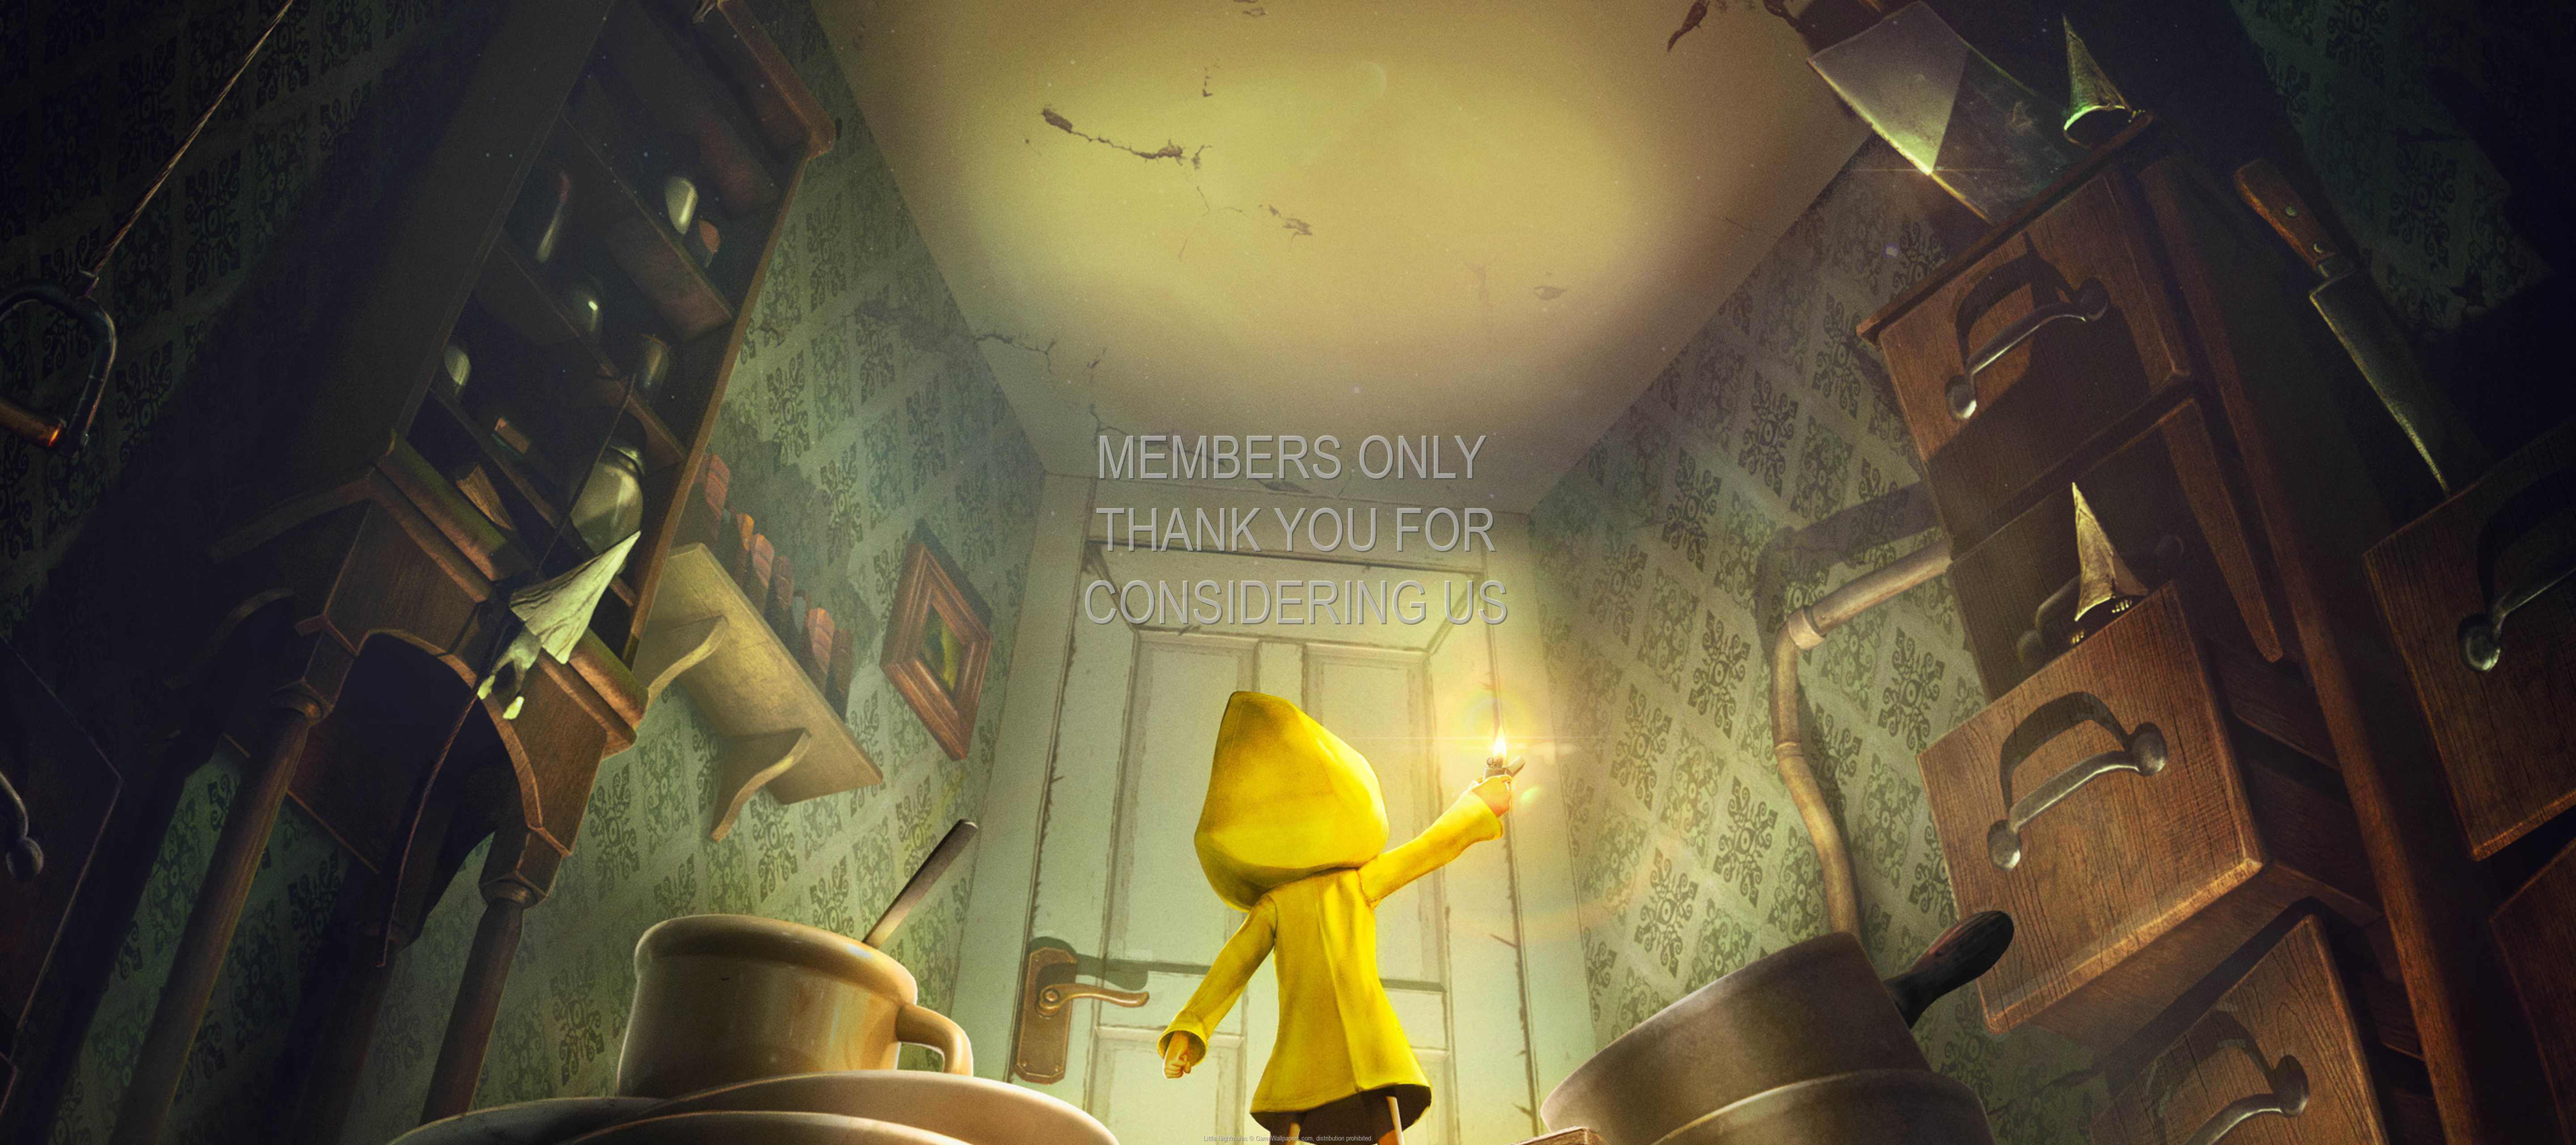 Little Nightmares 1440p%20Horizontal Mobile wallpaper or background 01